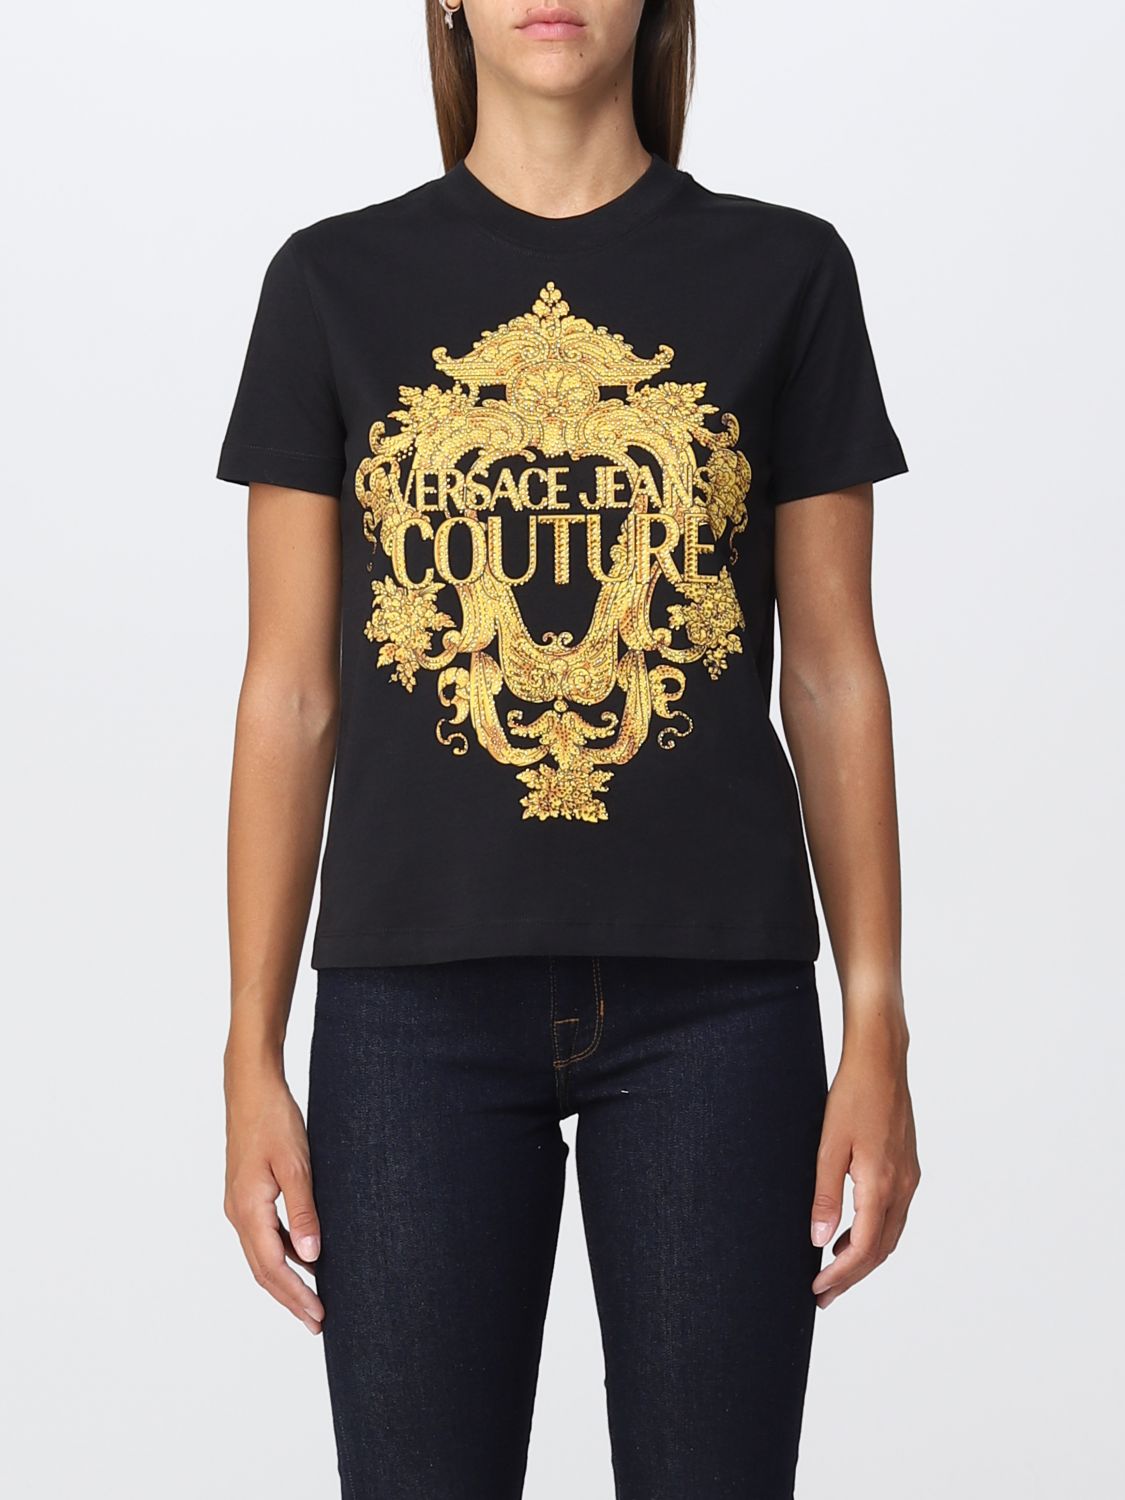 ensom kanal golf Versace Jeans Couture Outlet: t-shirt for woman - Black | Versace Jeans  Couture t-shirt 73HAHP02CJ01P online on GIGLIO.COM